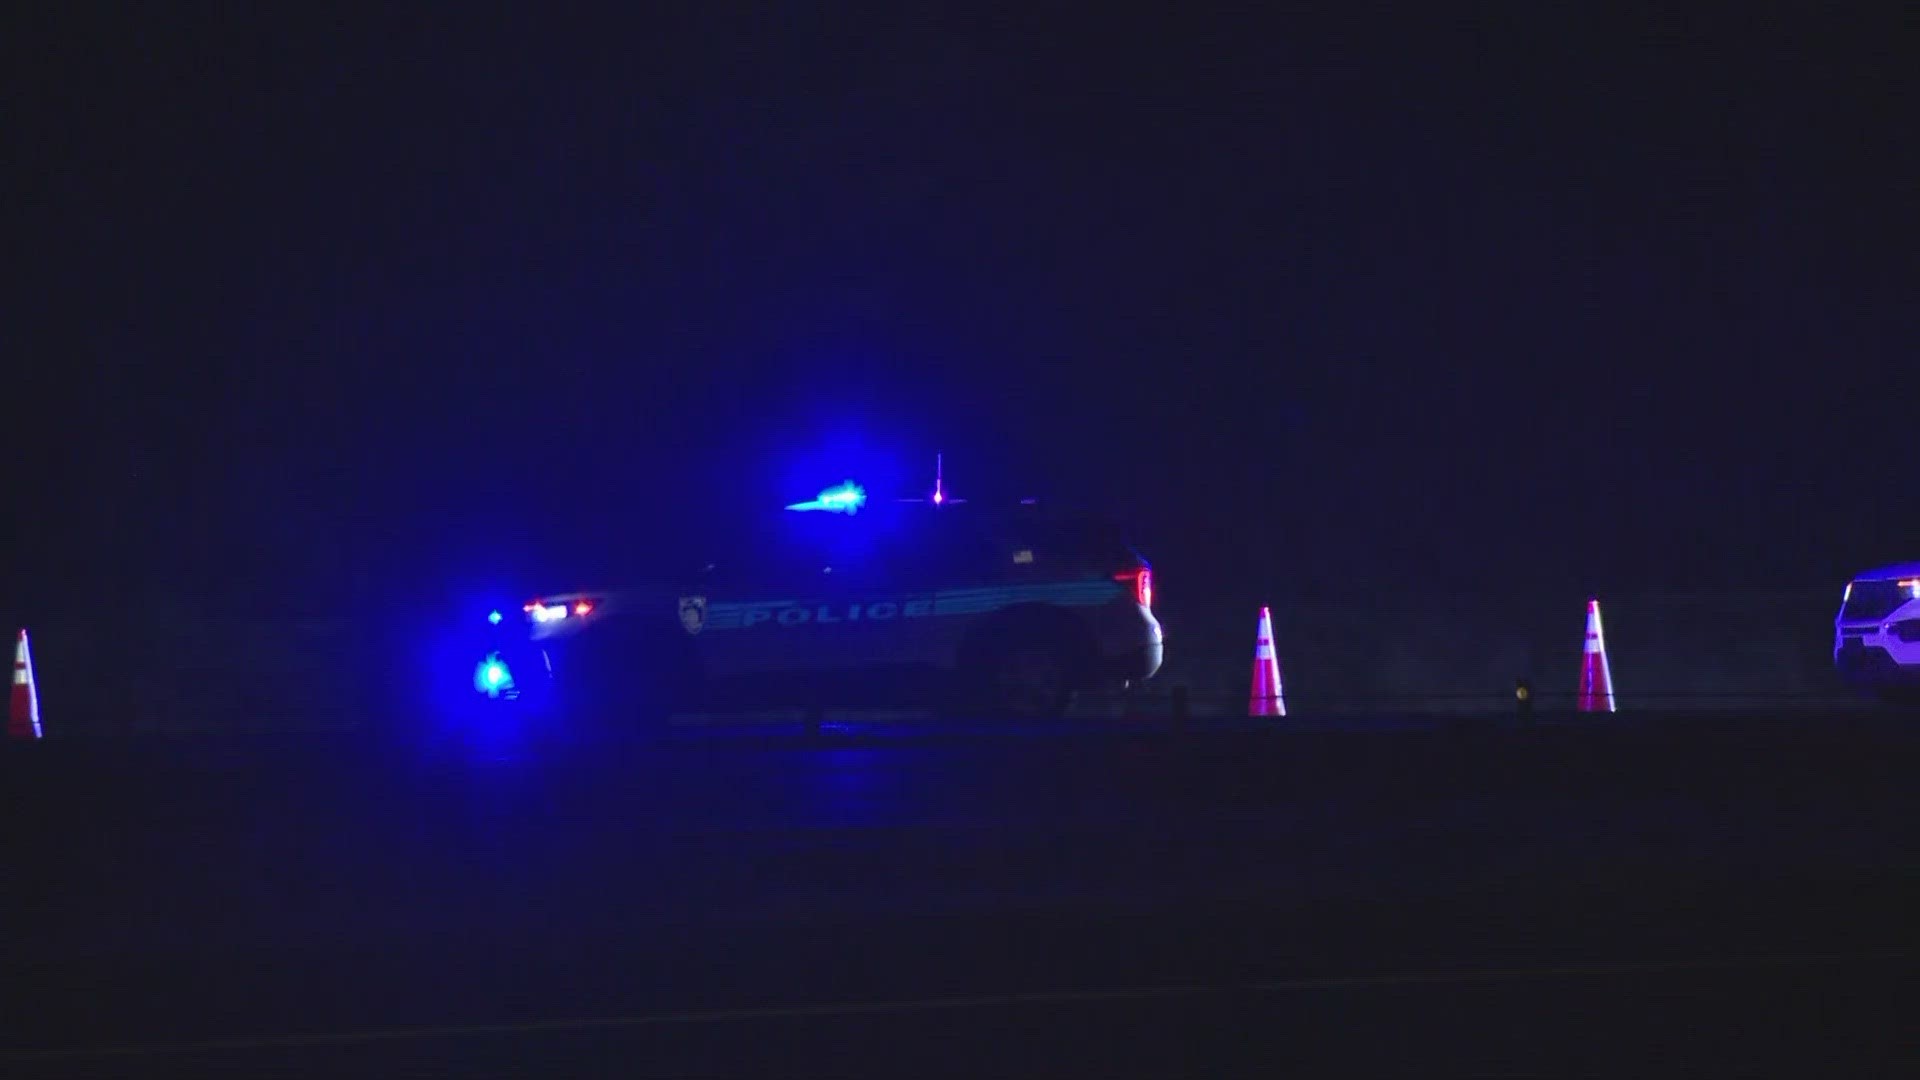 The inner loop of I-485 was closed early Tuesday following a deadly crash in northeast Charlotte.